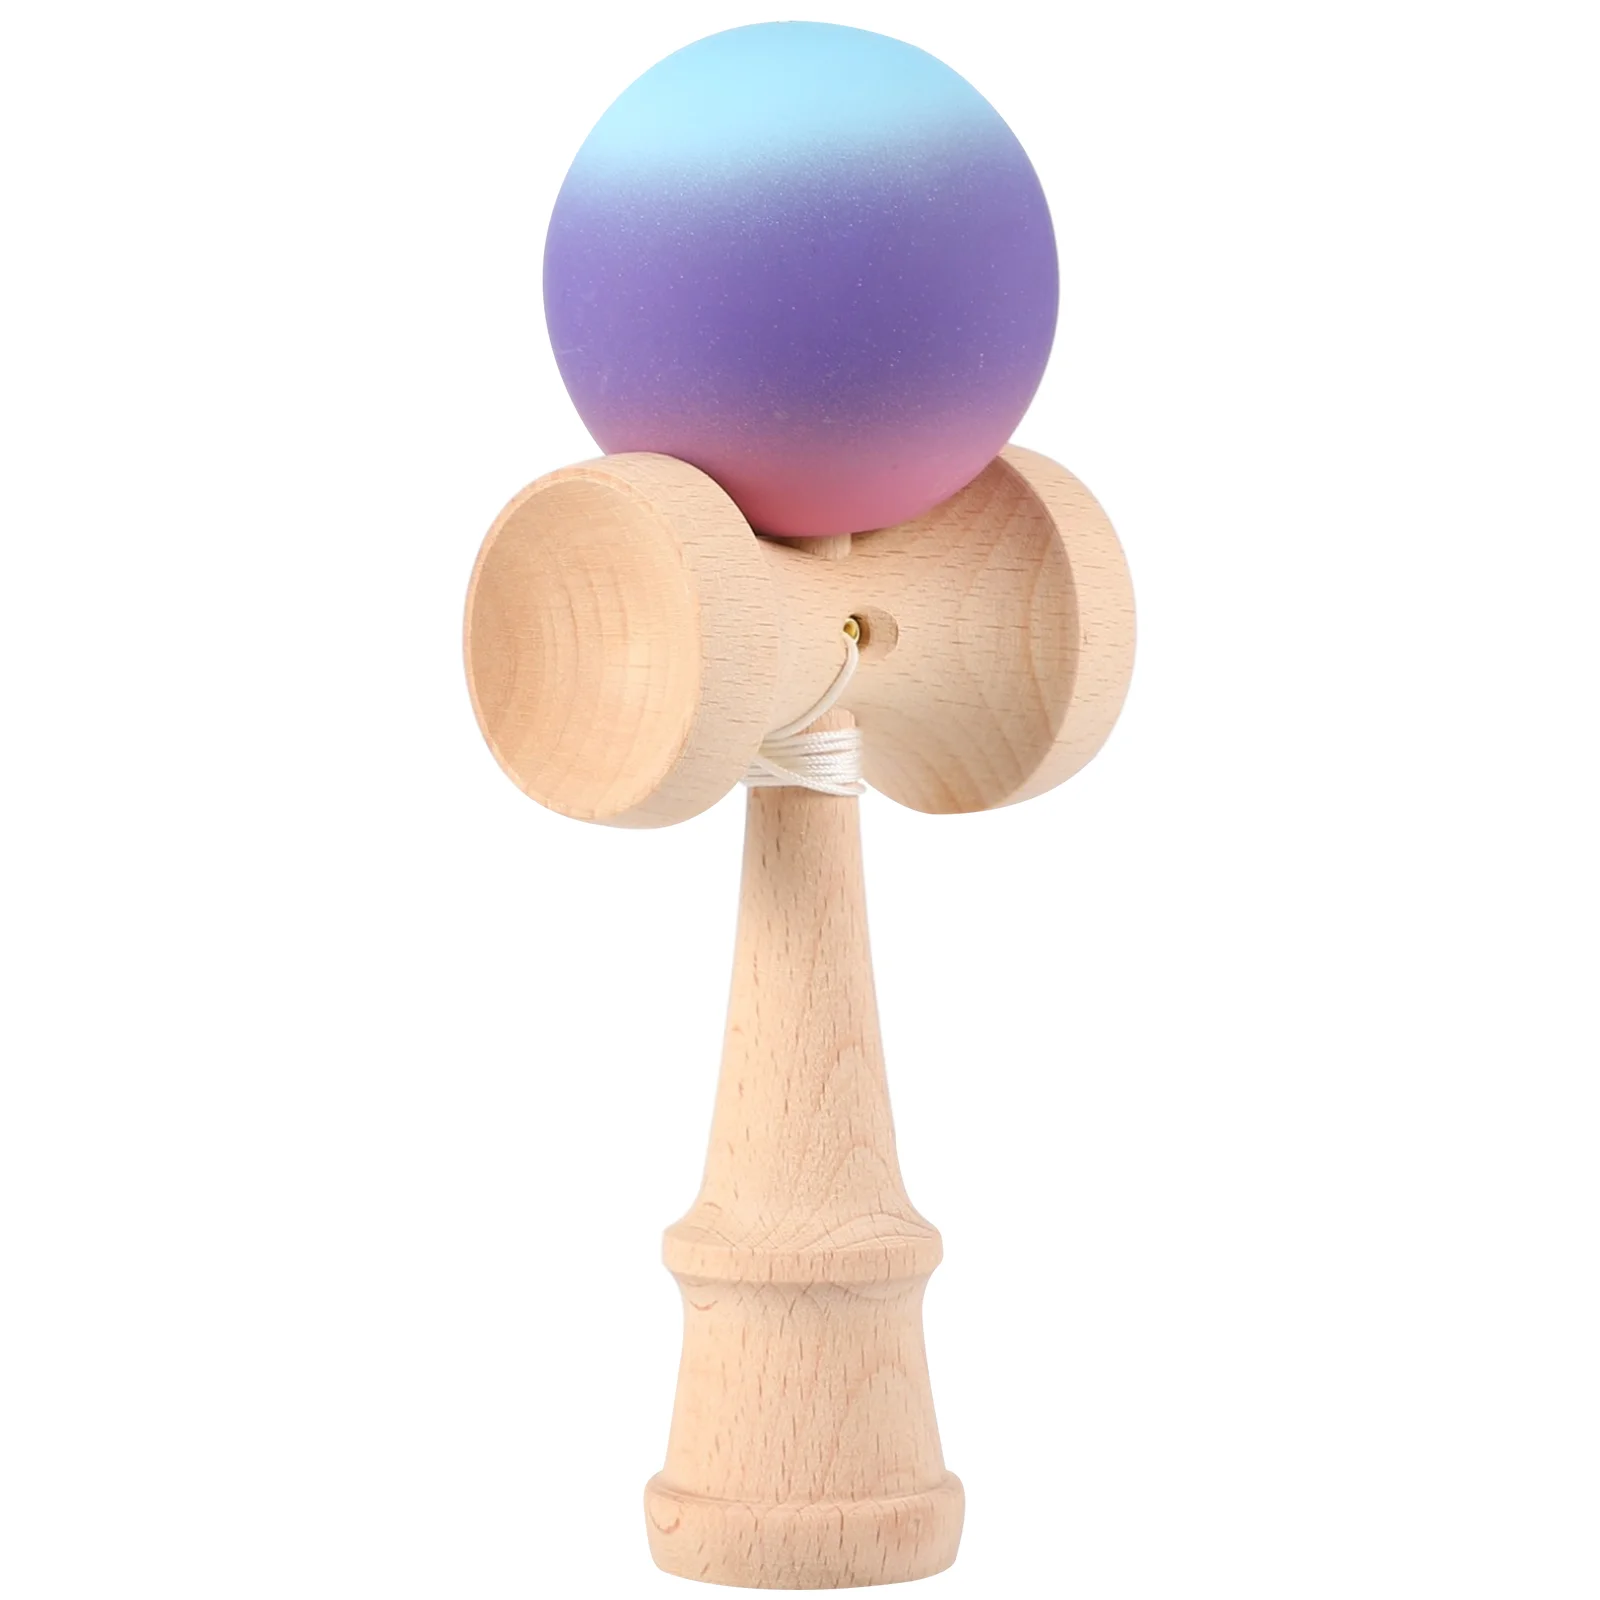 

Wood Kendama Kendama Model Japanese Toss and Catch Skill Game in A Cup Game Hand Eye Coordination Toys for Balancing Building